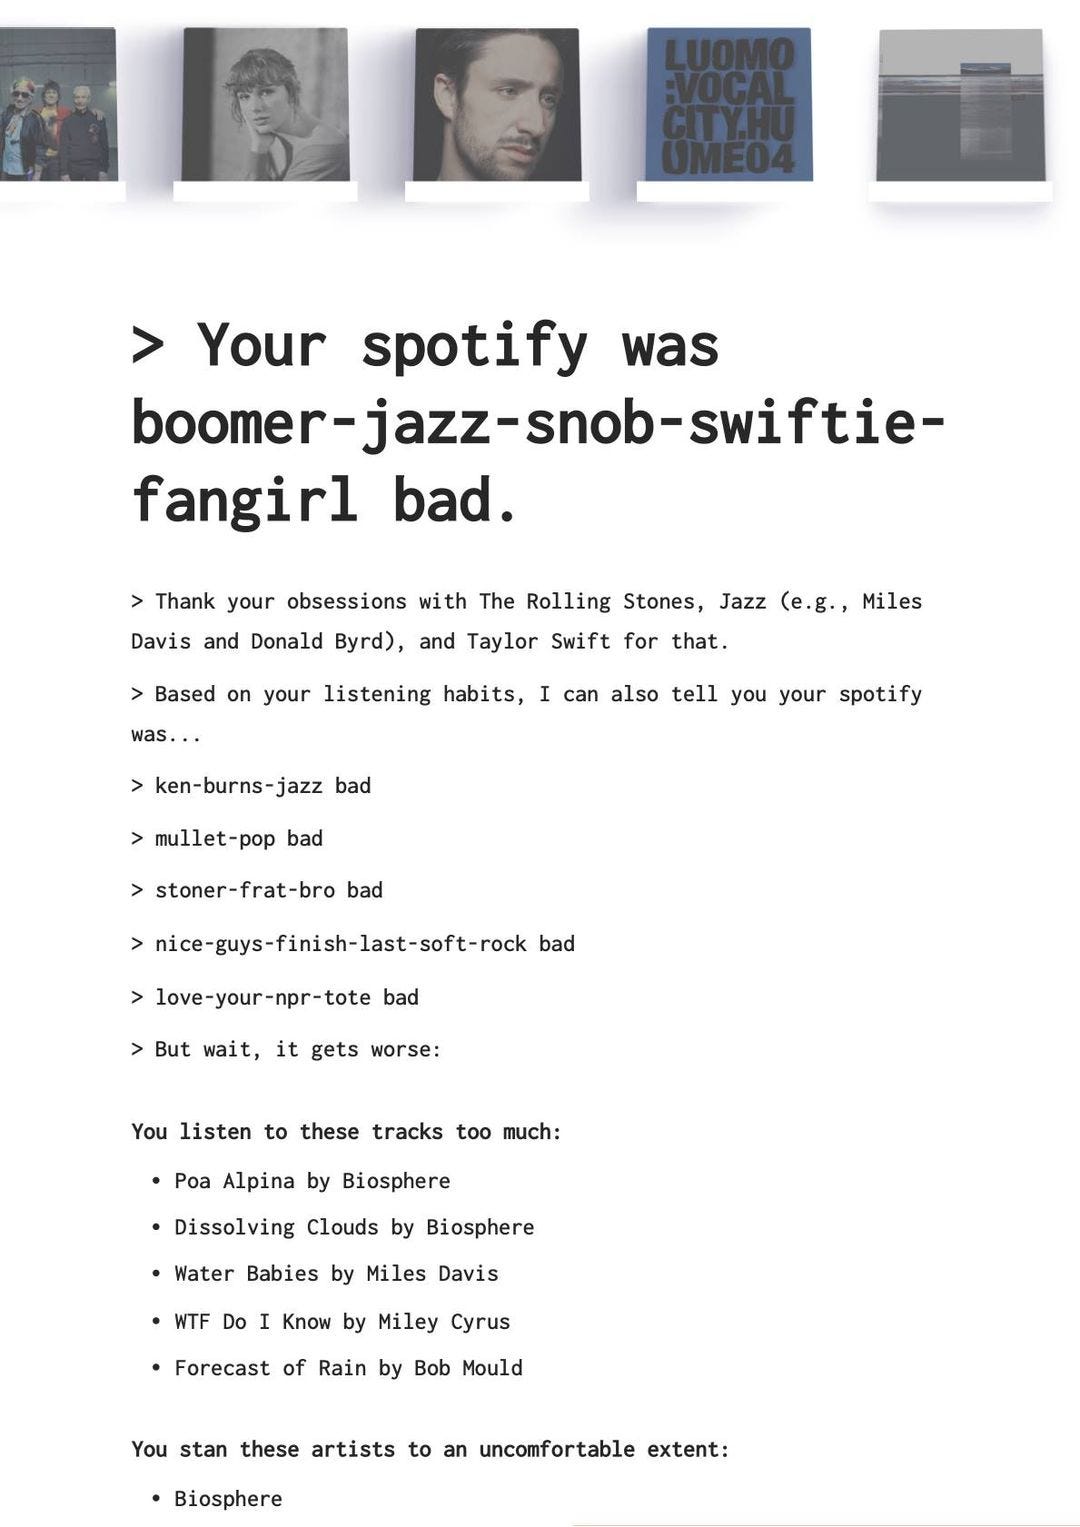 L'immagine può contenere: 2 persone, il seguente testo "Your spotify was boomer-jazz-snob-swiftie- fangirl bad. Thank your obsessions with The Rolling Stones, Jazz (e.g., Miles Davis and Donald Byrd), and Taylor Swift for that. was.. Based on your listening habits, I can also tell you your spotify ken-burns-jazz bad mullet-pop bad >stoner-frat-bro bad nice-guys-finish-last-soft-rook bad love-your-npr-tote bad But wait, it gets worse: You listen to these tracks too much: •Poa Alpina by Biosphere Dissolving Clouds by Biosphere •Water Babies by Miles Davis WTF Do Know by Miley Cyrus Forecast of Rain by Bob Mould You stan these artists to an uncomfortable extent: Biosphere"